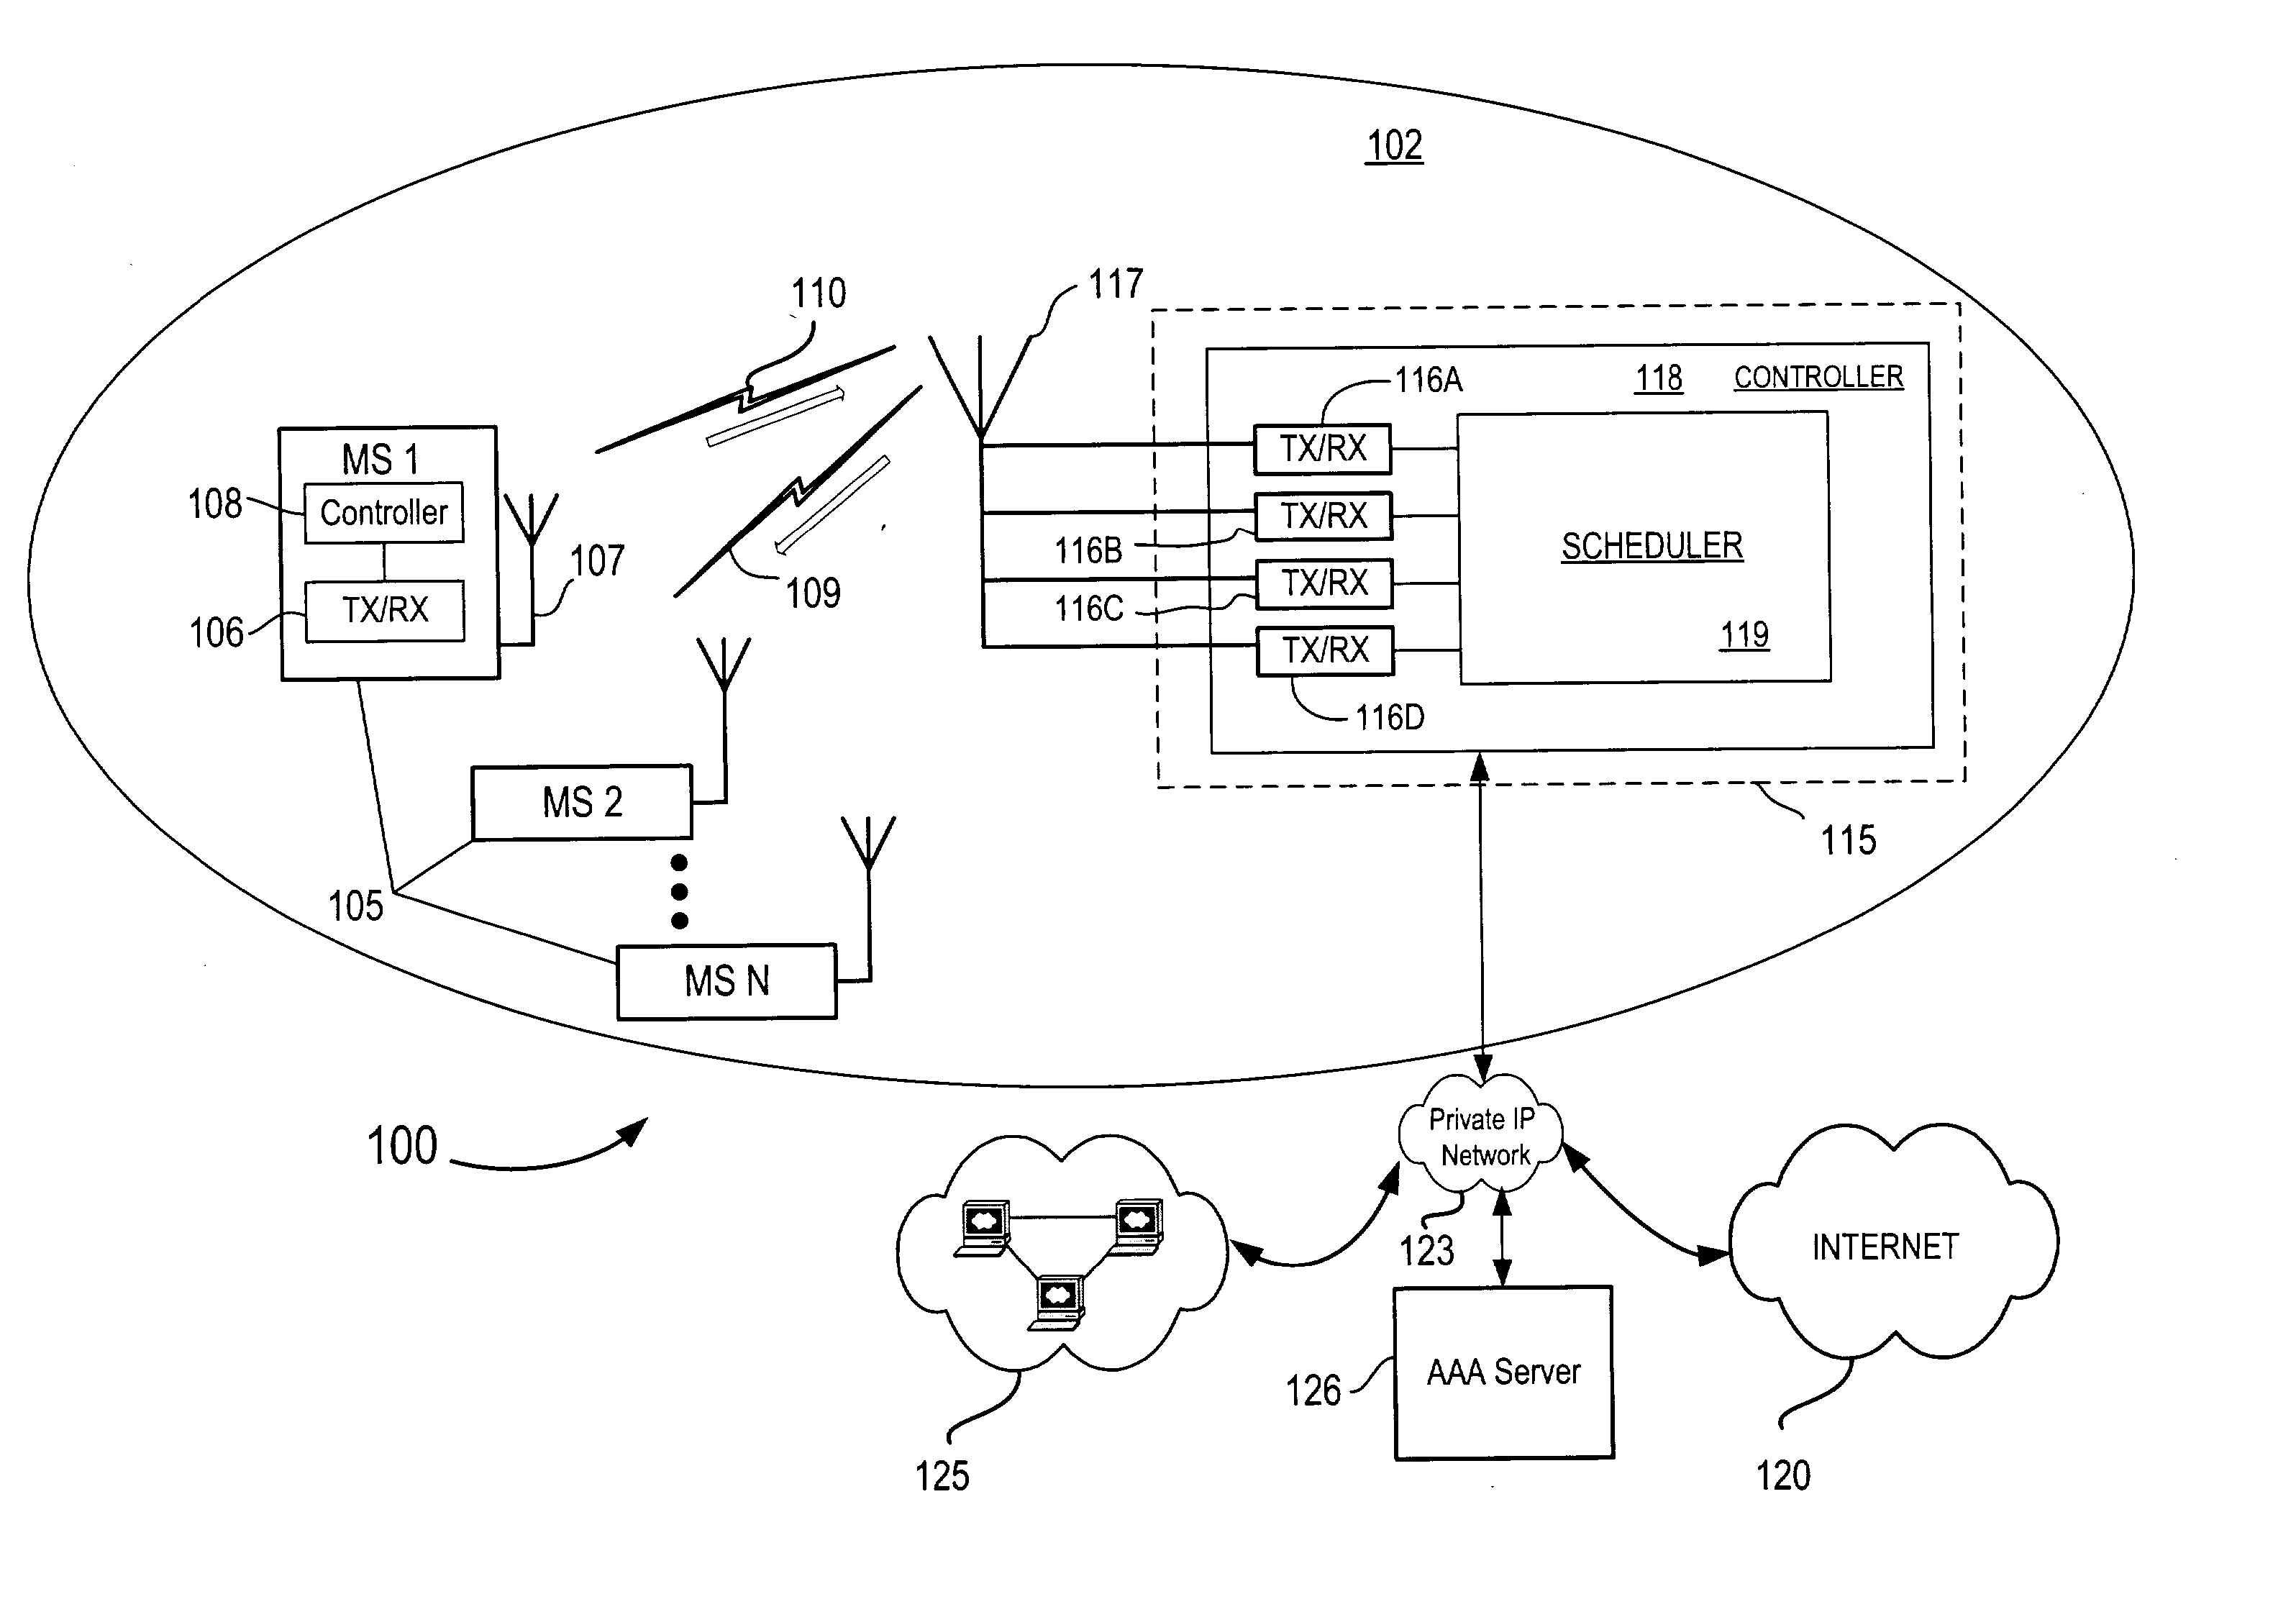 Scheduler and method for scheduling transmissions in a communication network